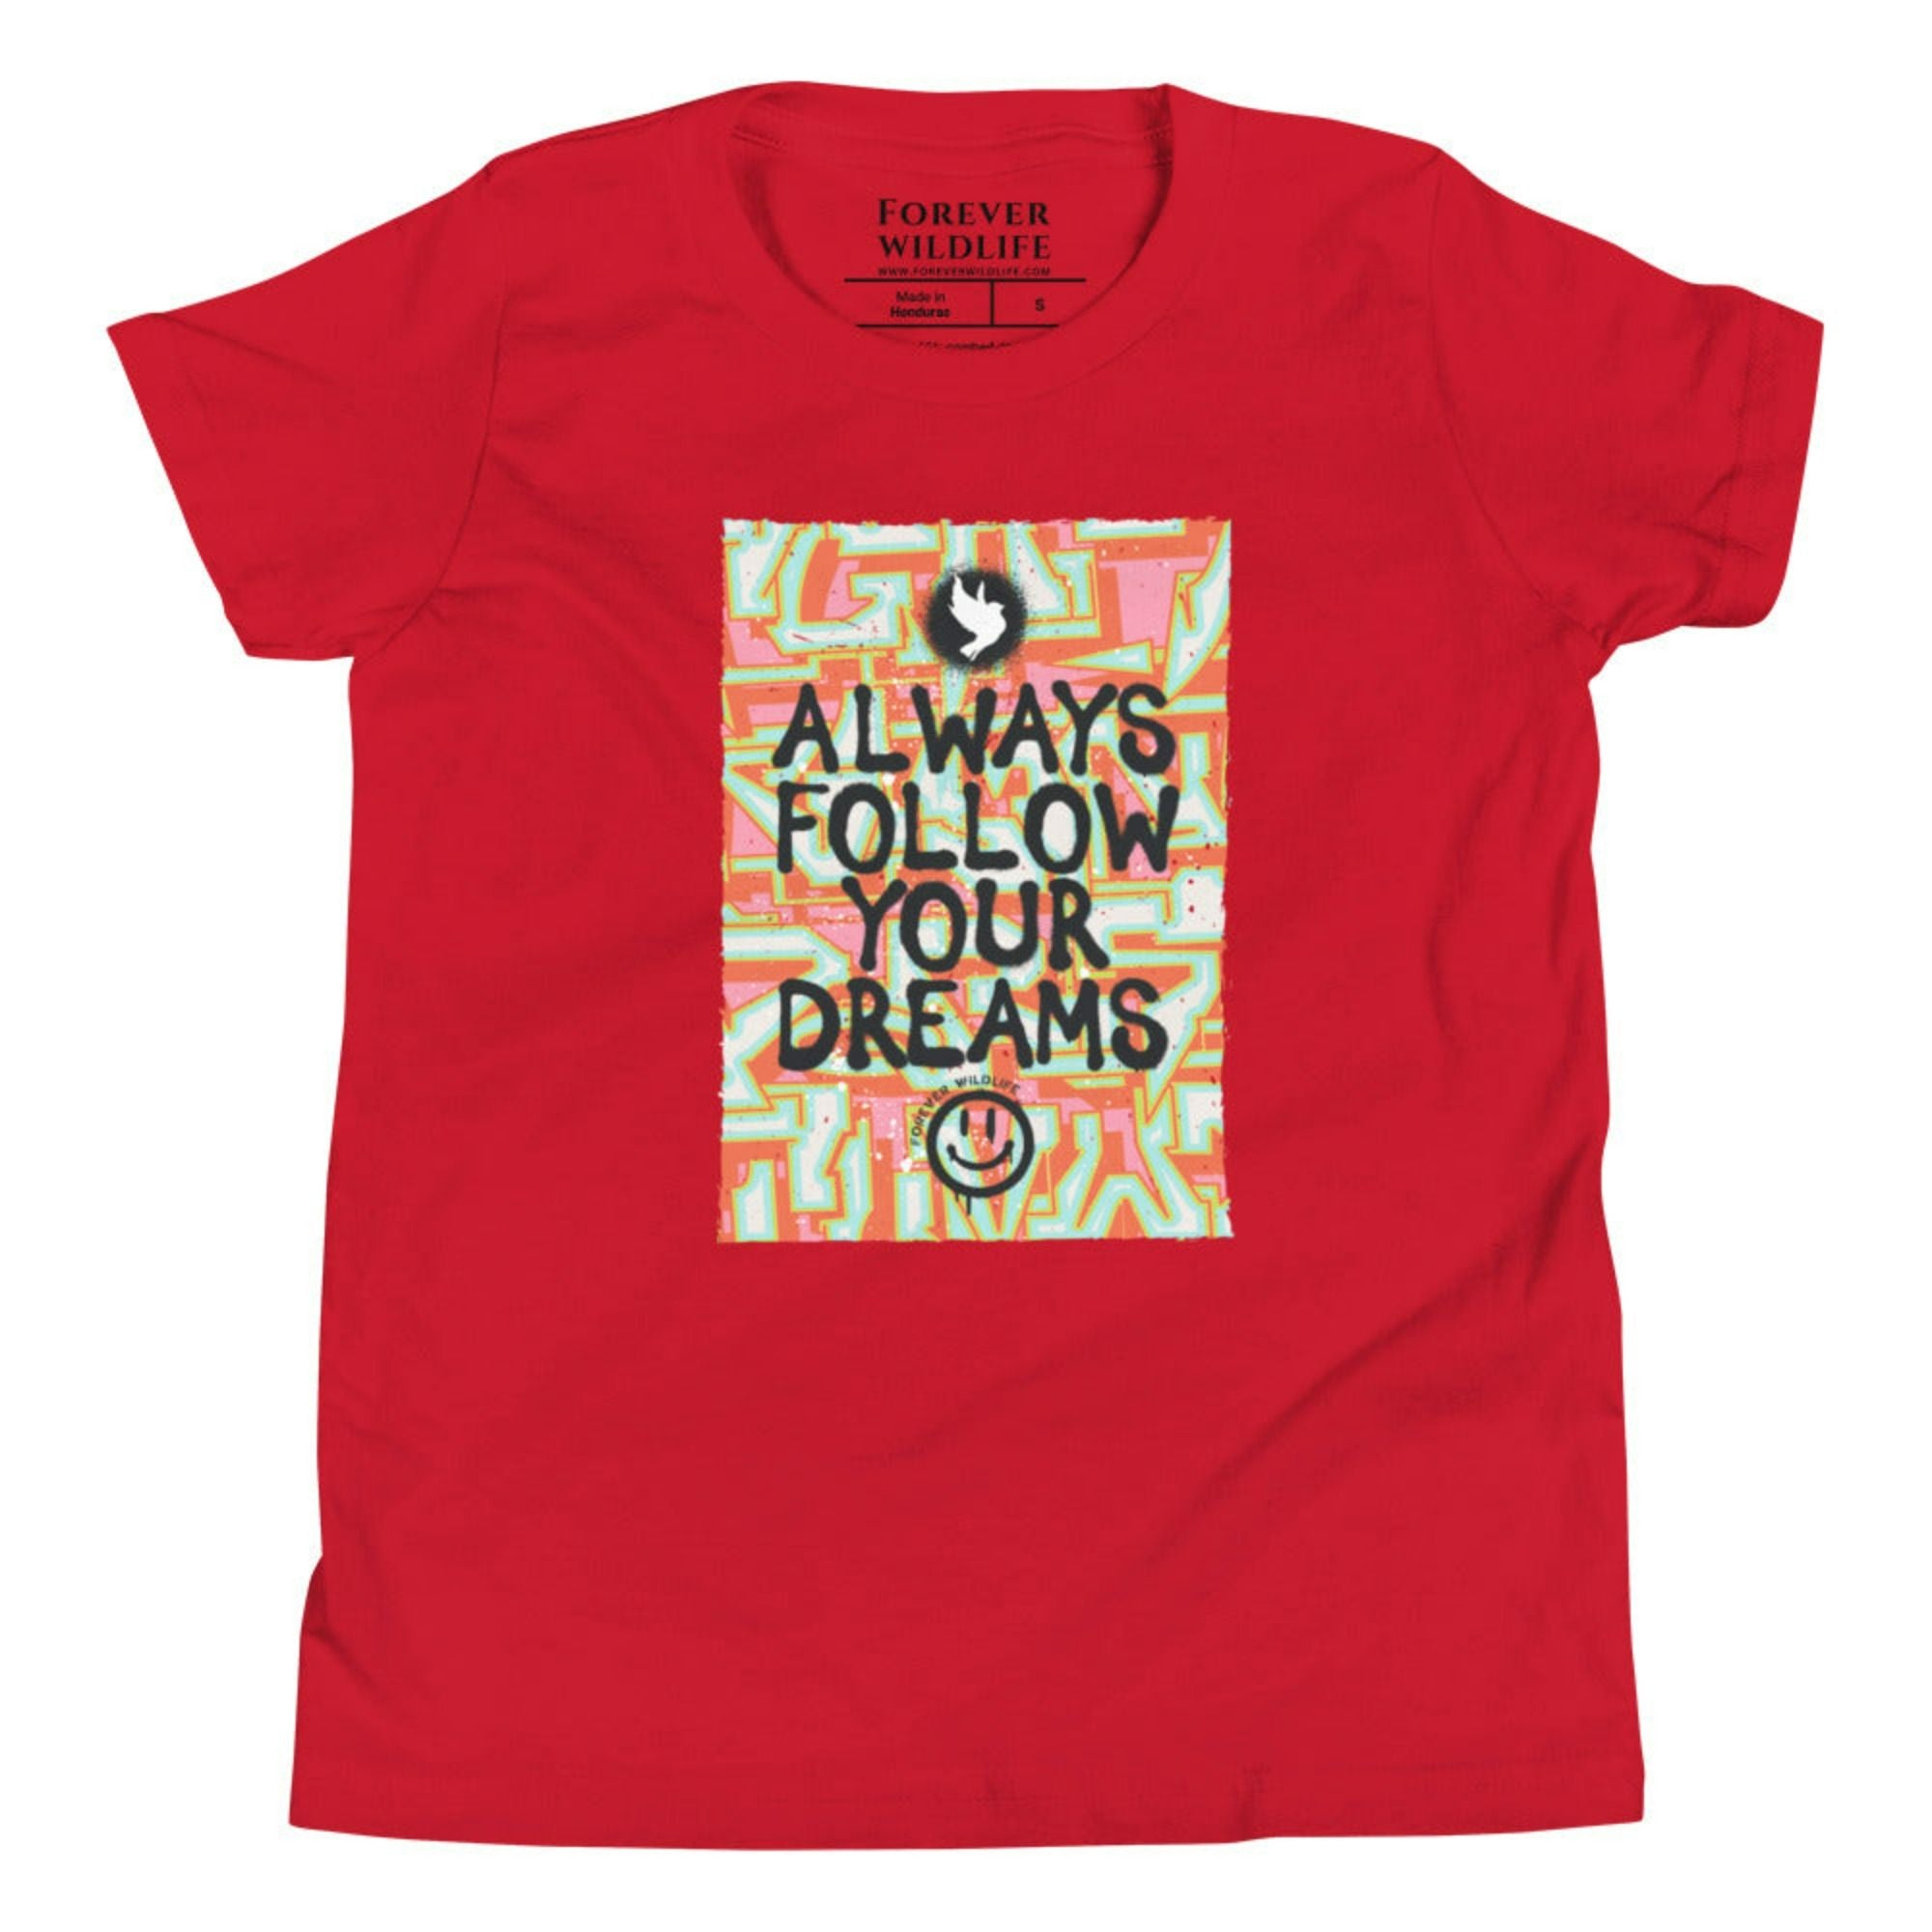 Red Dove Youth T-Shirt with Dove graphic as part of Wildlife T Shirts, Wildlife Clothing & Apparel by Forever Wildlife